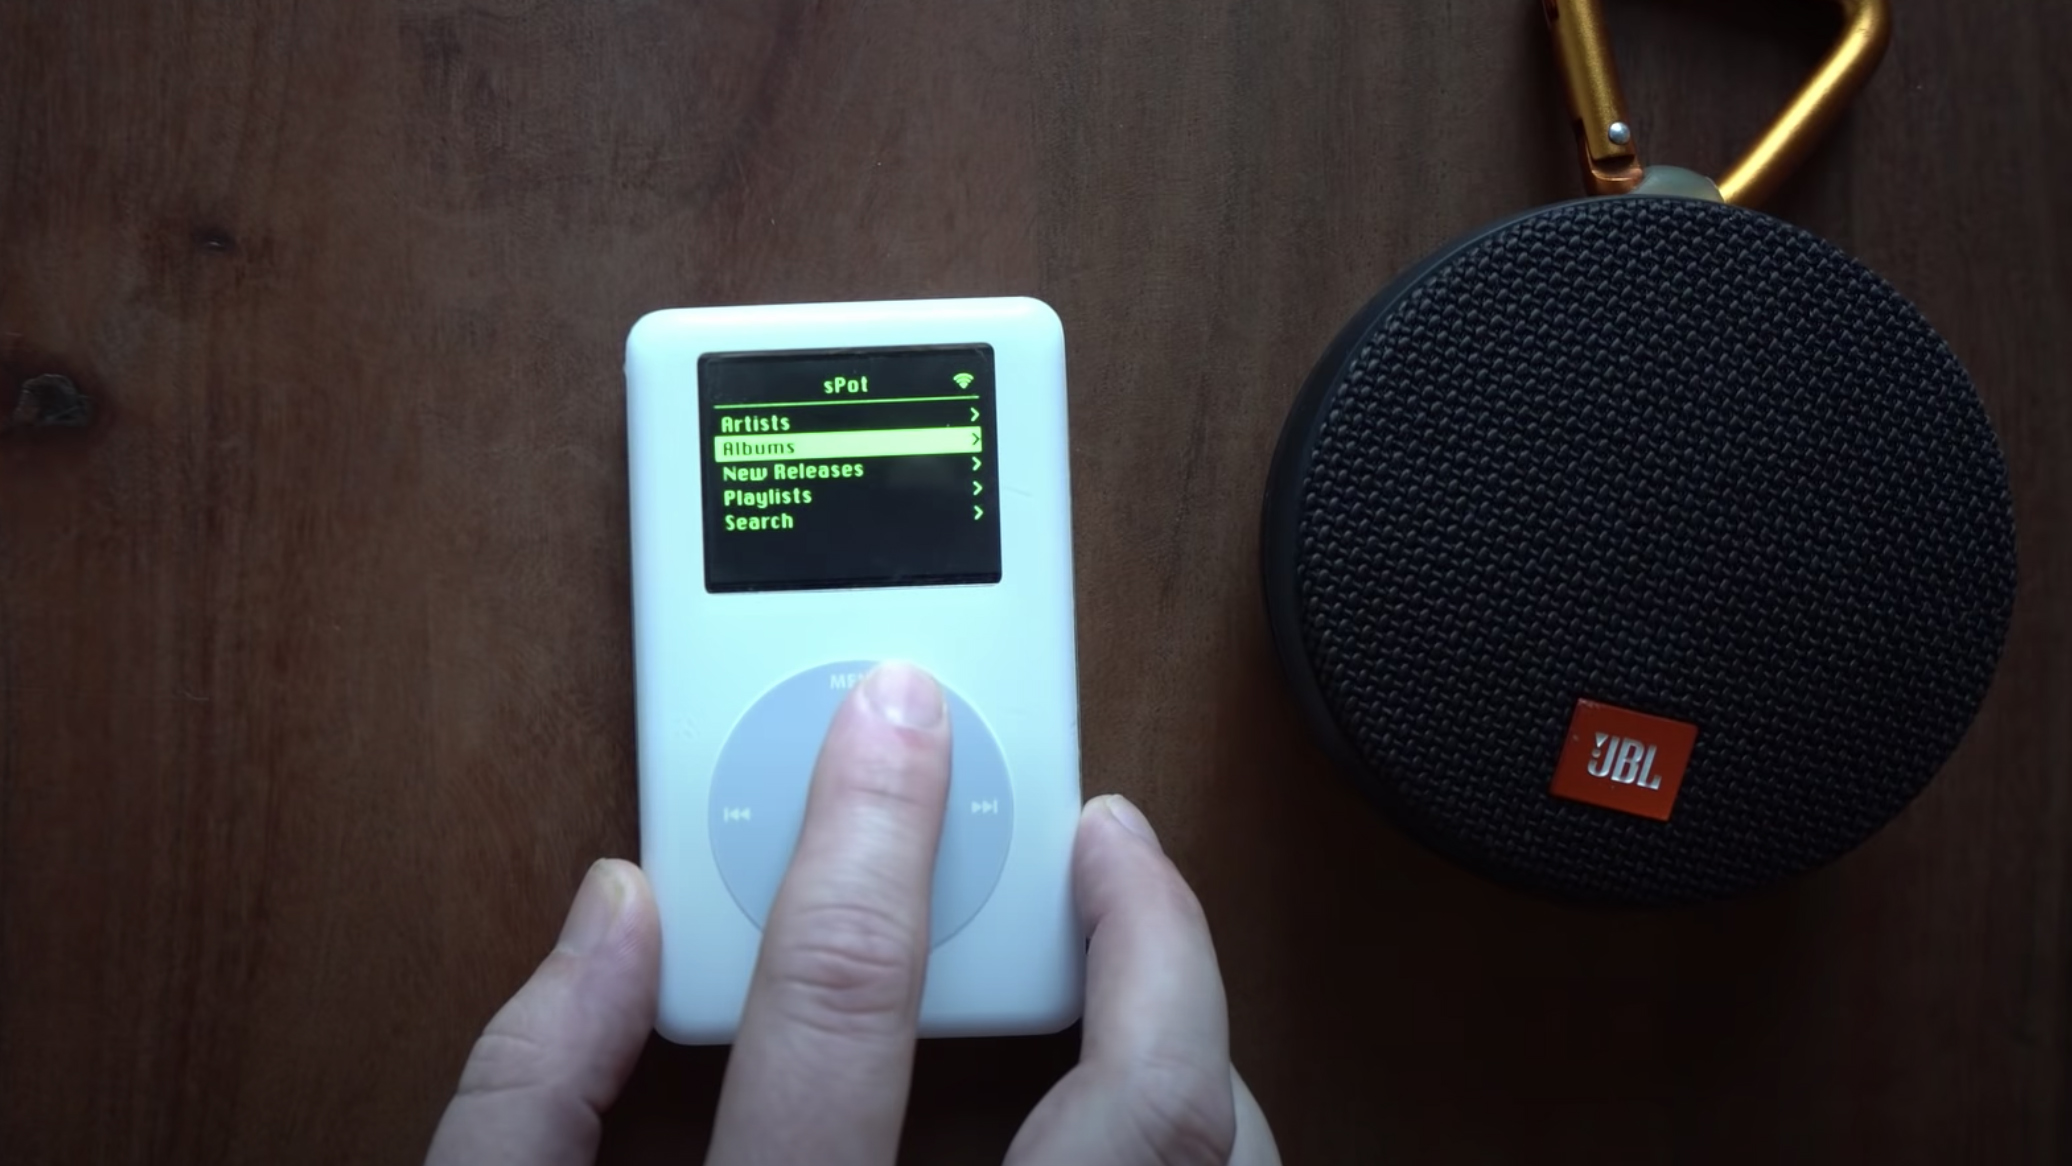 This modified iPod Classic now has wi-fi, Bluetooth and Spotify